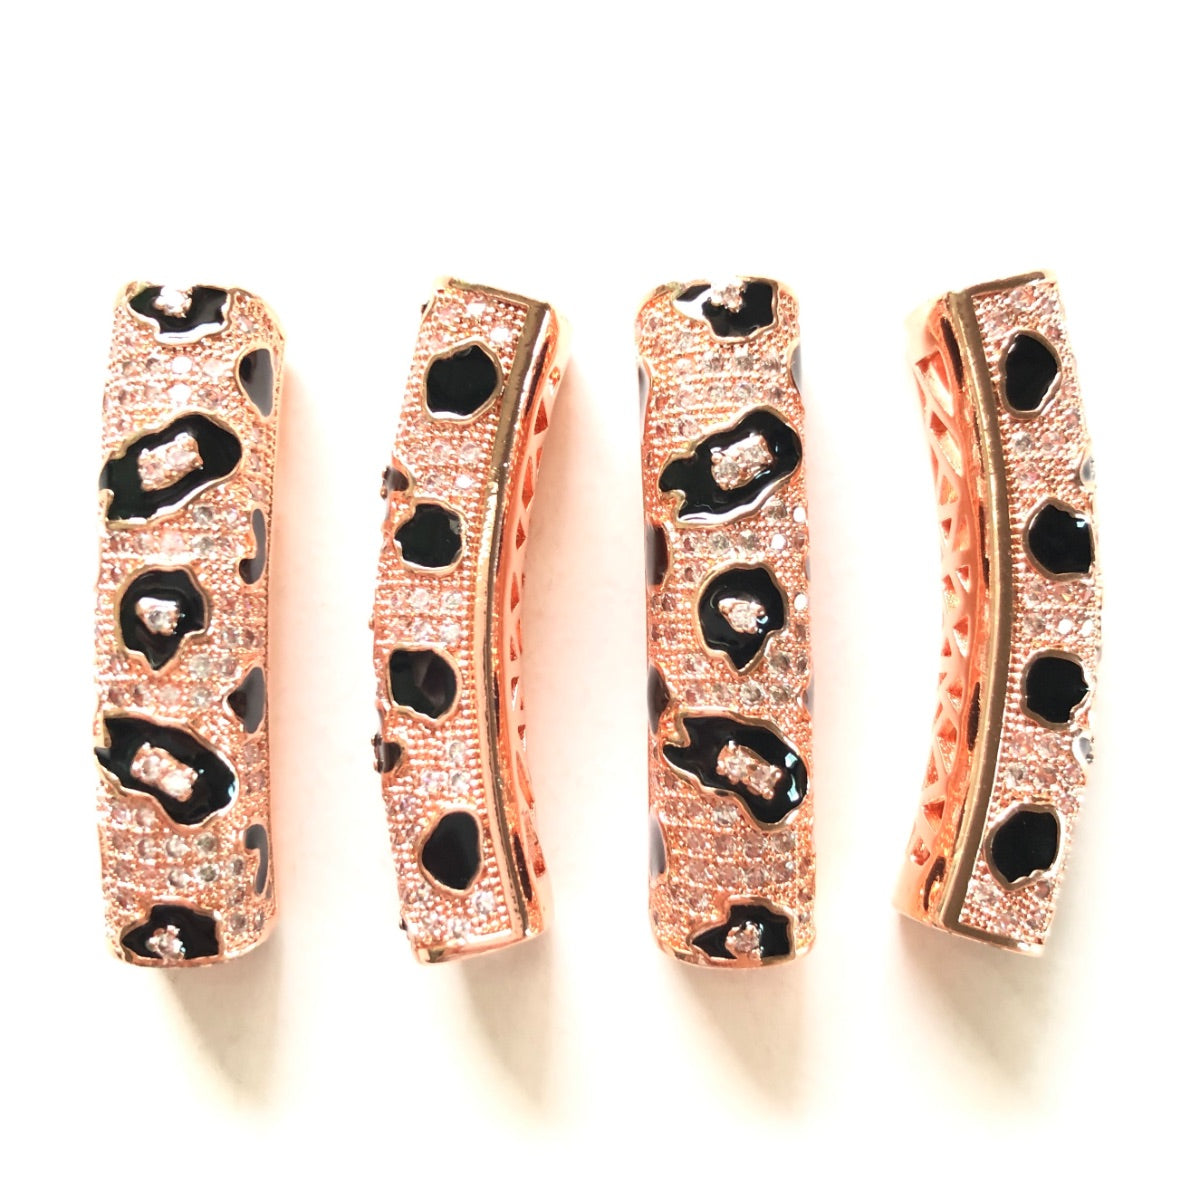 5-10pcs/lot 37.7*9mm Black Enamel Leopard Print CZ Paved Tube Bar Spacers Rose Gold CZ Paved Spacers Leopard Printed New Spacers Arrivals Tube Bar Centerpieces Charms Beads Beyond